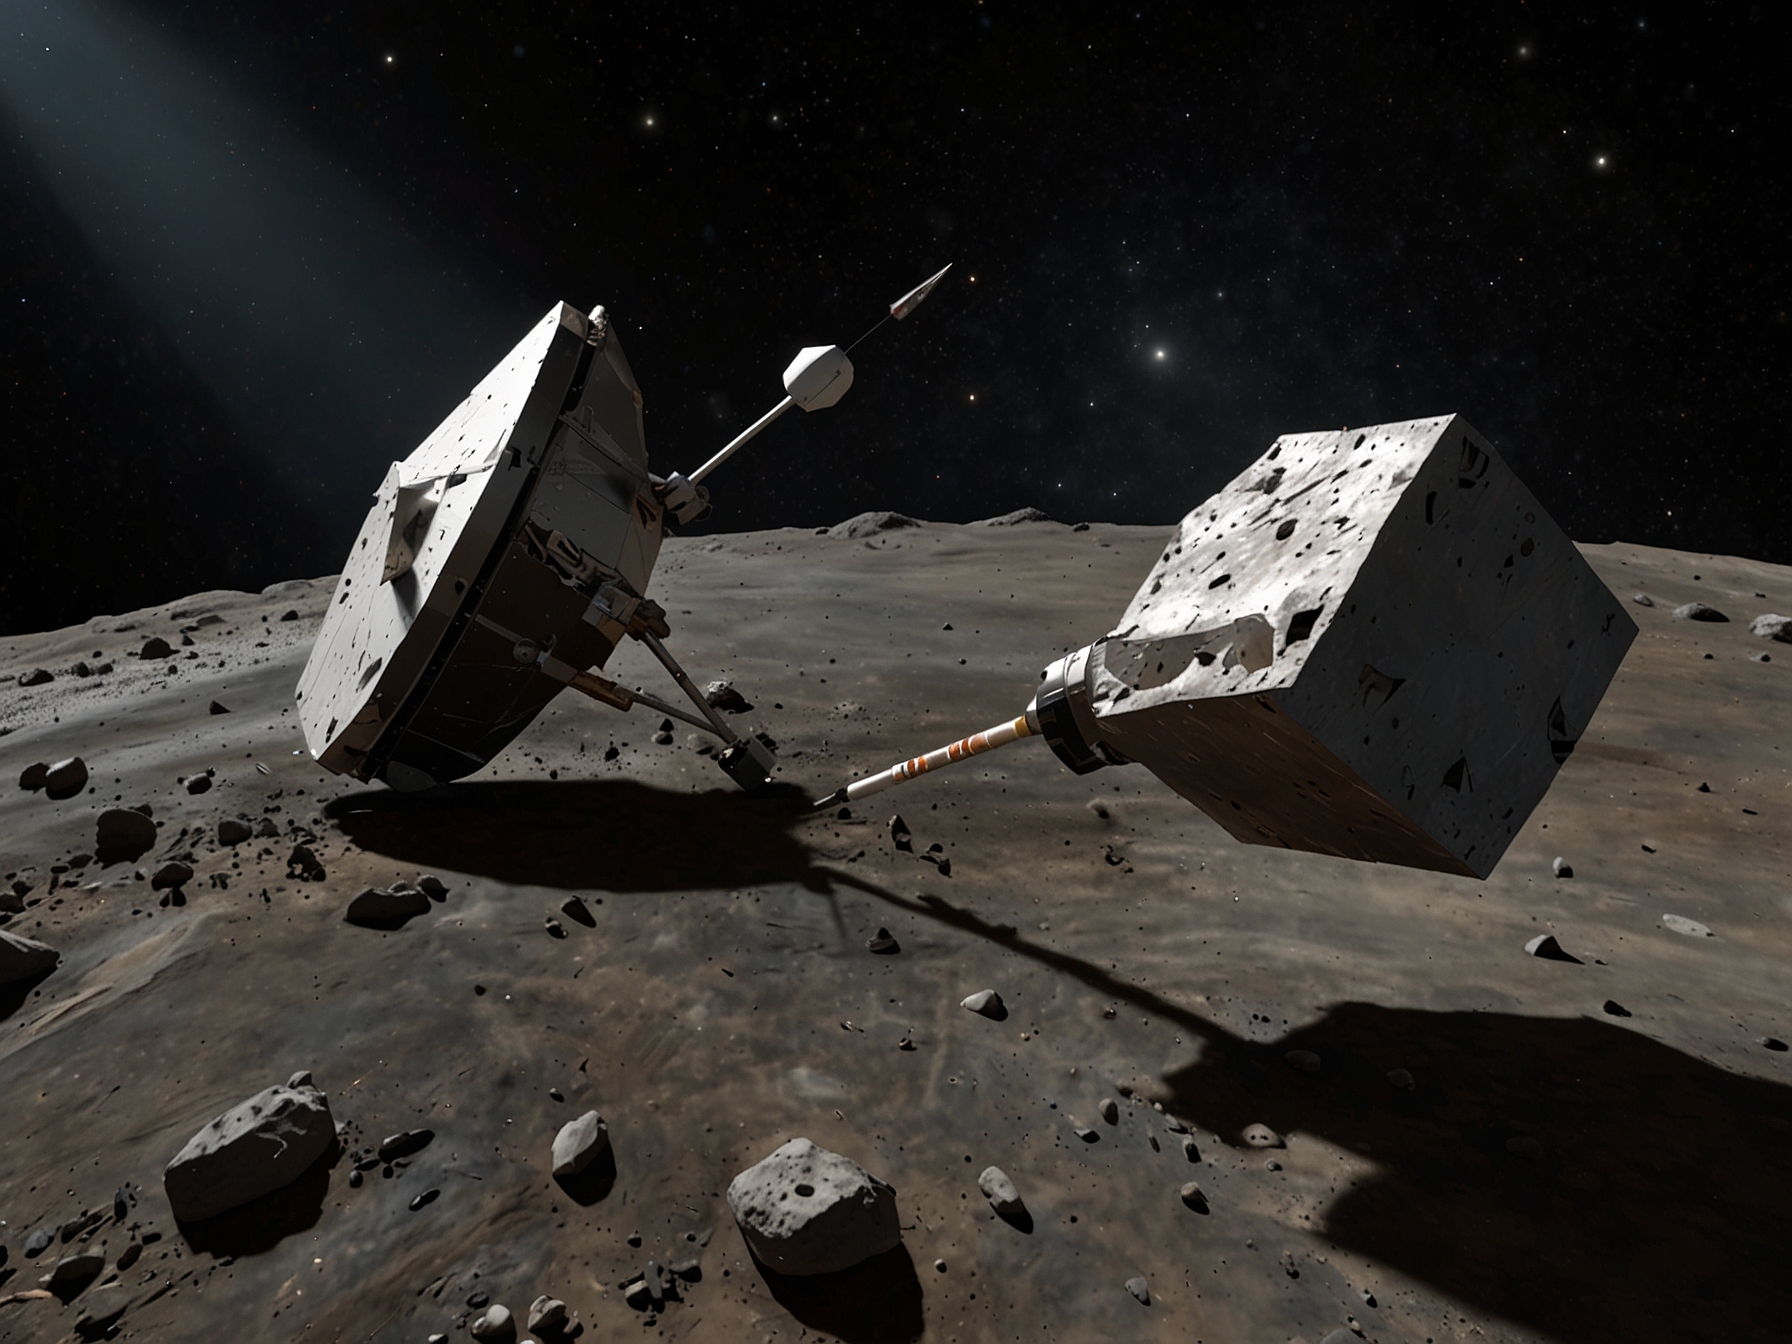 An artist's impression of the OSIRIS-REx spacecraft collecting a sample from asteroid Bennu, showcasing the meticulous process of retrieving ancient cosmic materials for study.